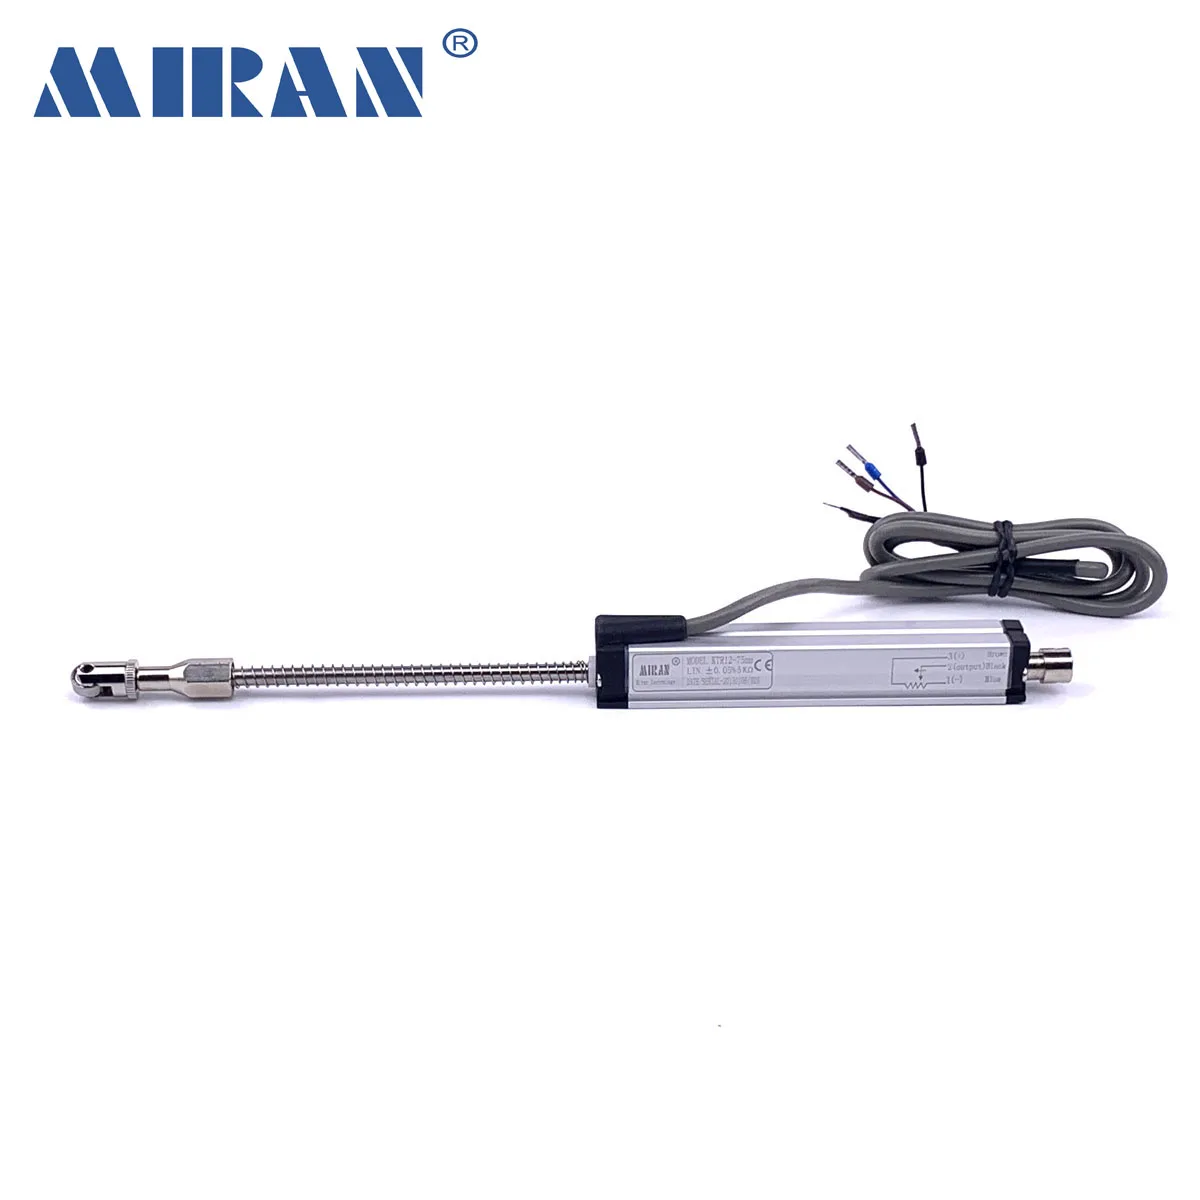 Miran Spring Self-return KTR12 10mm-25mm Displacement Transducer Accuracy 0.0005mm High Precision Linear Position Sensor/Scale enlarge